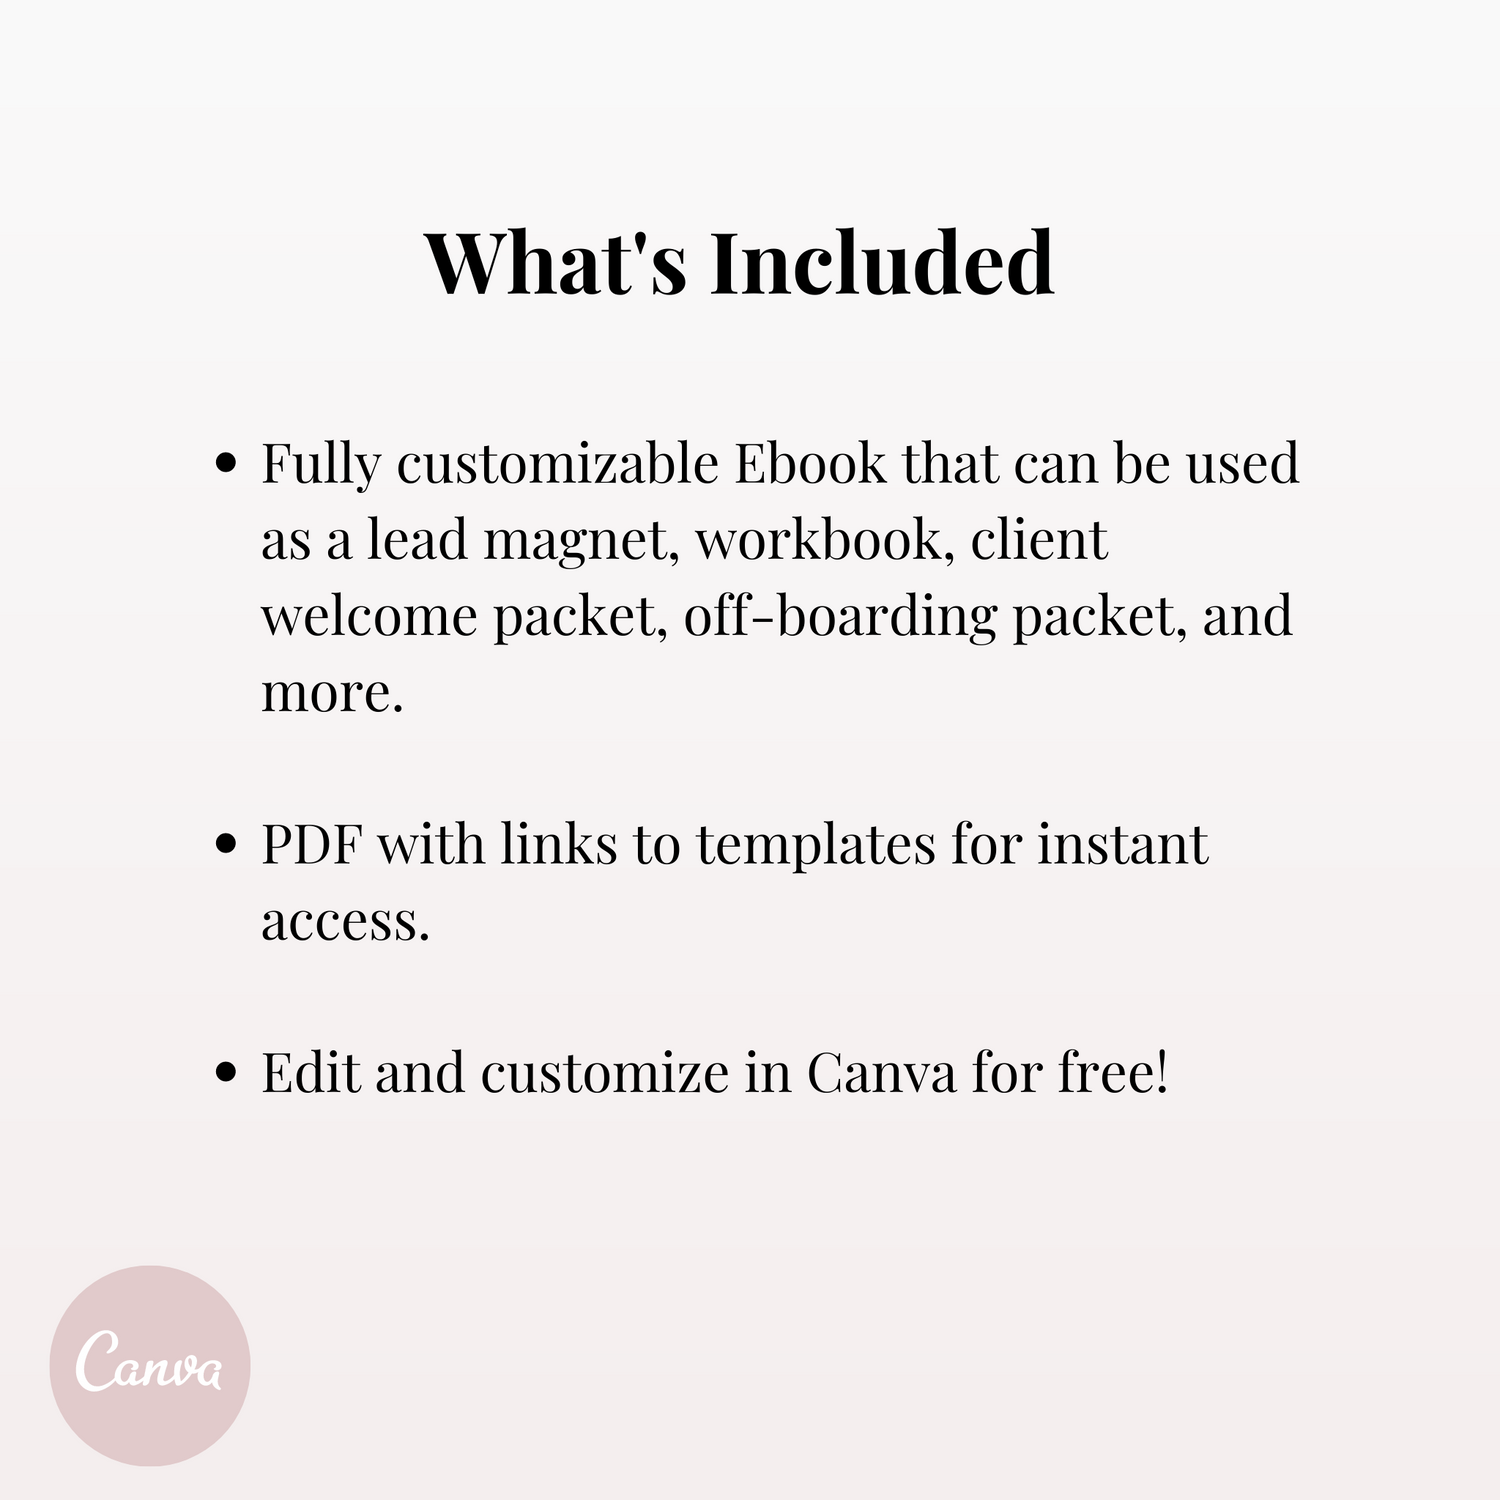 The minimalist lead magnet/workbook template is professionally designed in Canva and can be easily customized using a free Canva account. This done-for-you template bundle includes fully customizable templates to help you easily create a lead magnet, workbook, client welcome package, on-boarding package, off-boarding package, and more client experience content. Get instant access and start attracting your ideal clients. 